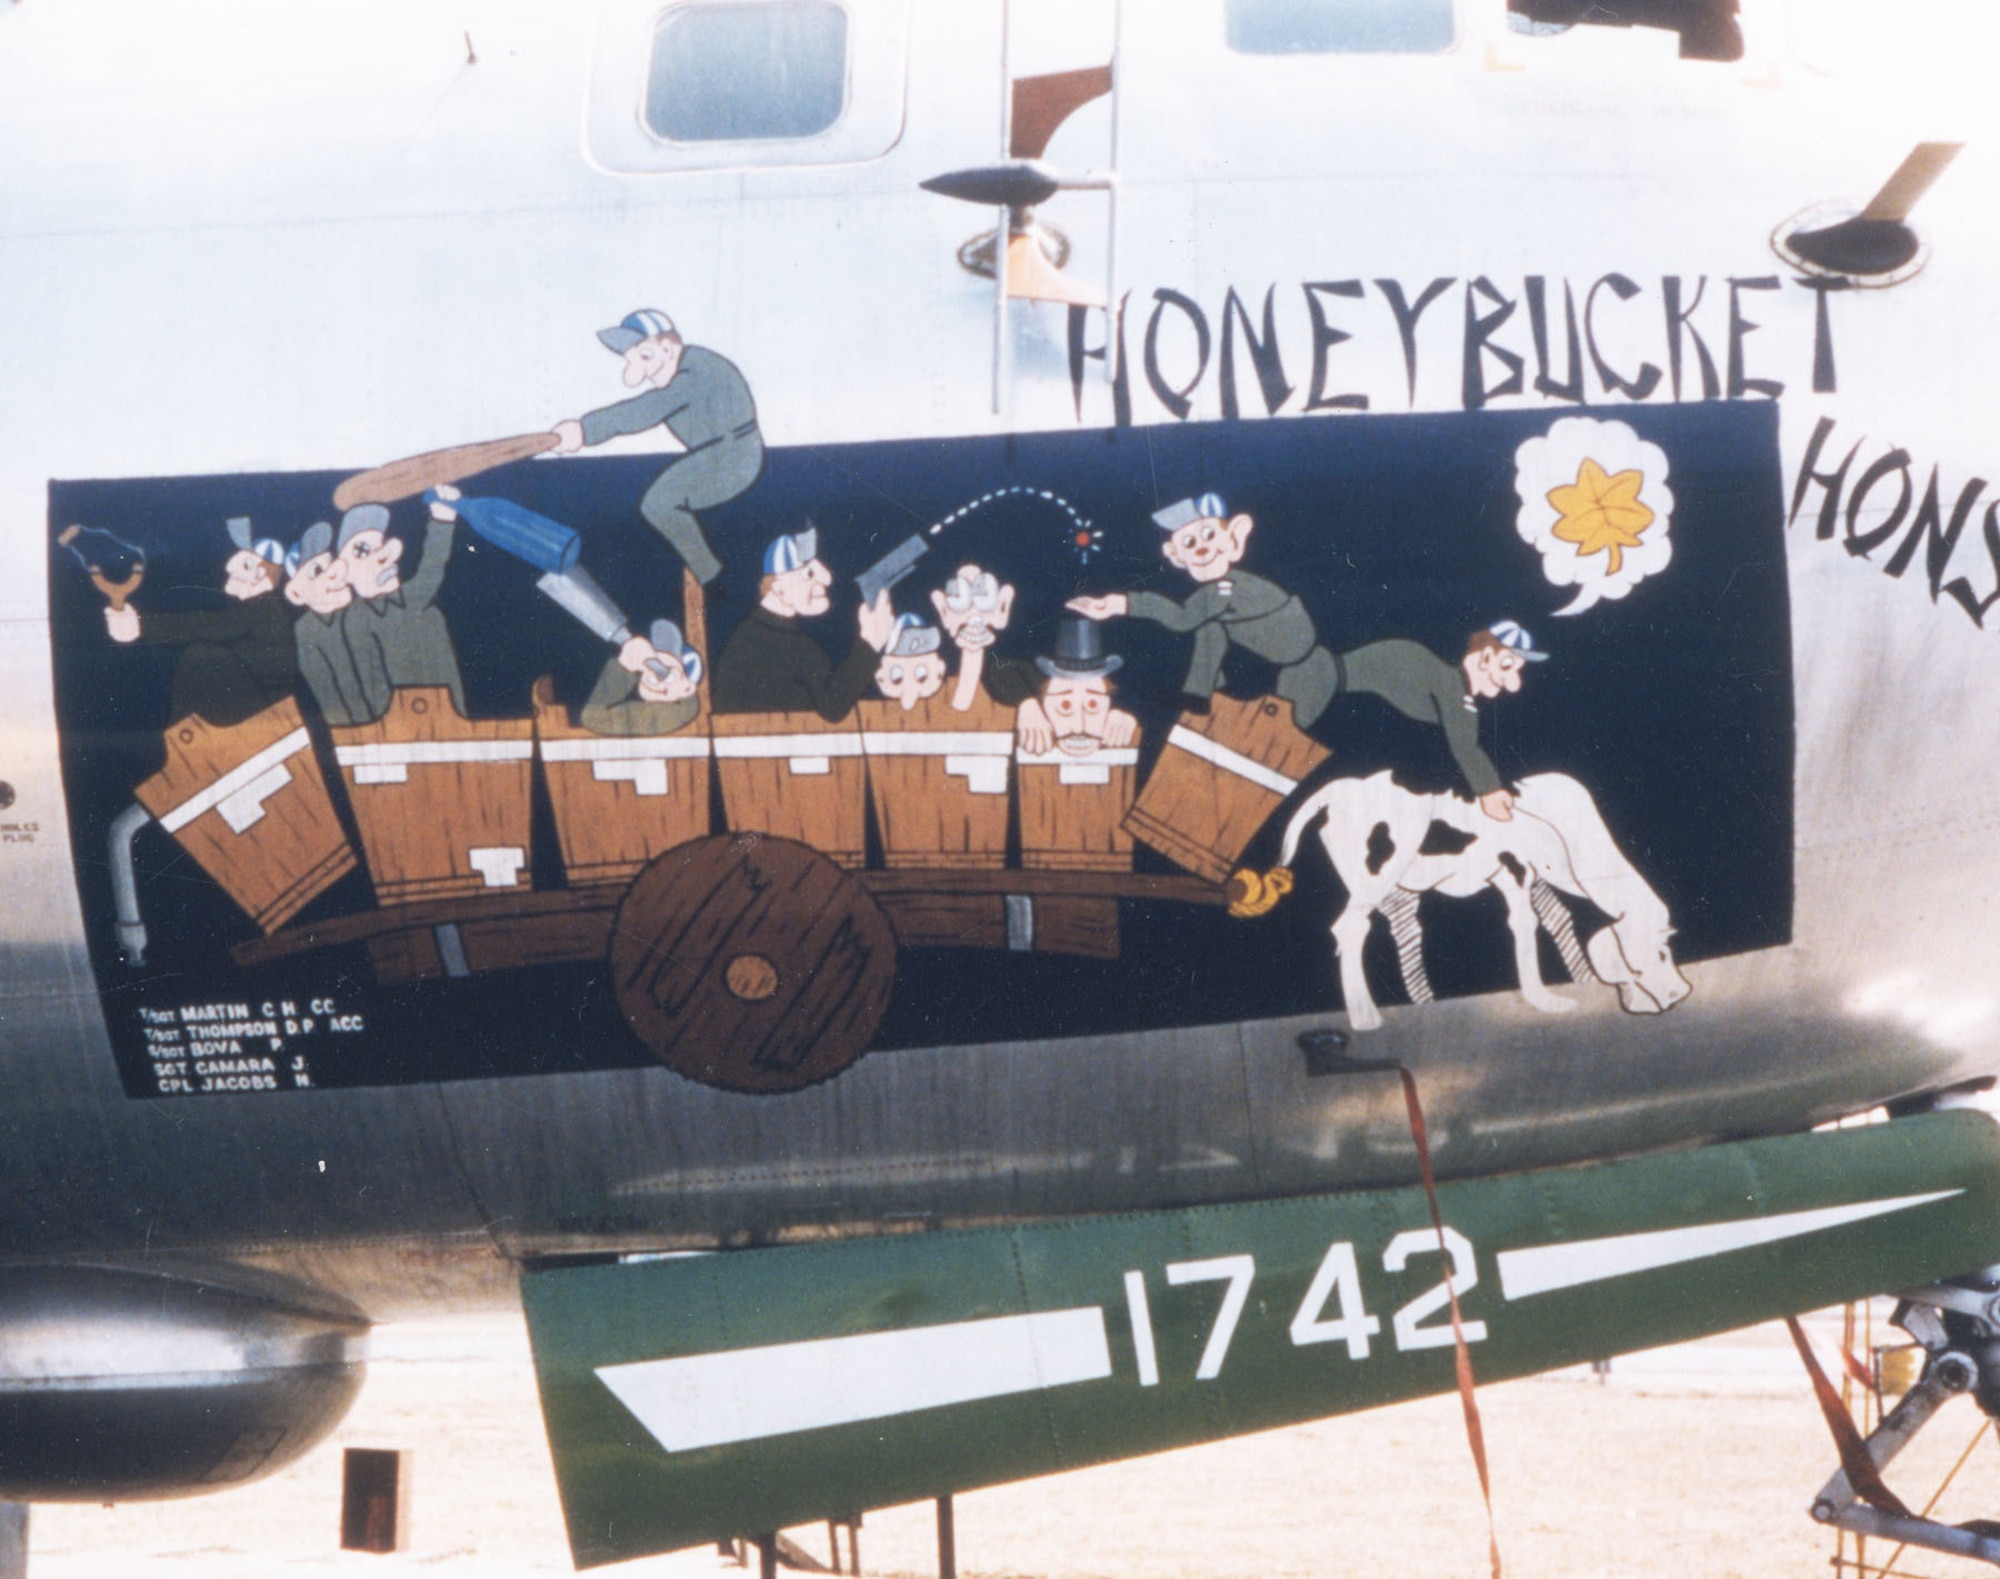 "Honeybucket Honsho." The B-29’s large fuselage made an ideal canvas for nose art. (U.S. Air Force photo)